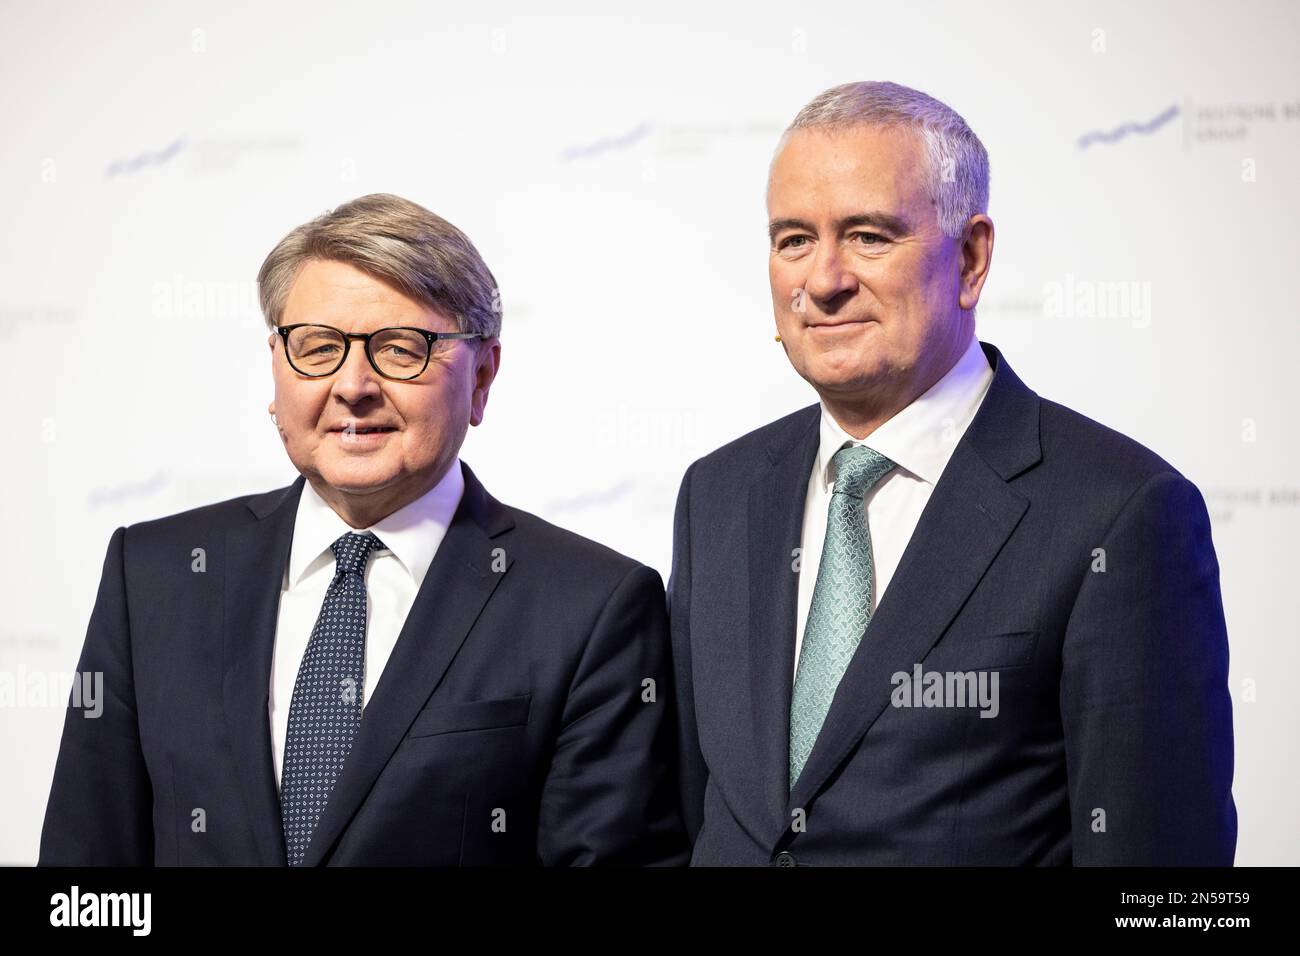 09 February 2023, Hesse, Frankfurt/Main: Theodor Weimer (l), Chairman of the Executive Board of Deutsche Börse AG, and Gregor Pottmeyer, Executive Board member of Deutsche Börse AG, stand together shortly before the start of the press conference. Deutsche Börse Group presents its figures for the financial year 2022 at the annual press conference. Photo: Hannes P. Albert/dpa Stock Photo